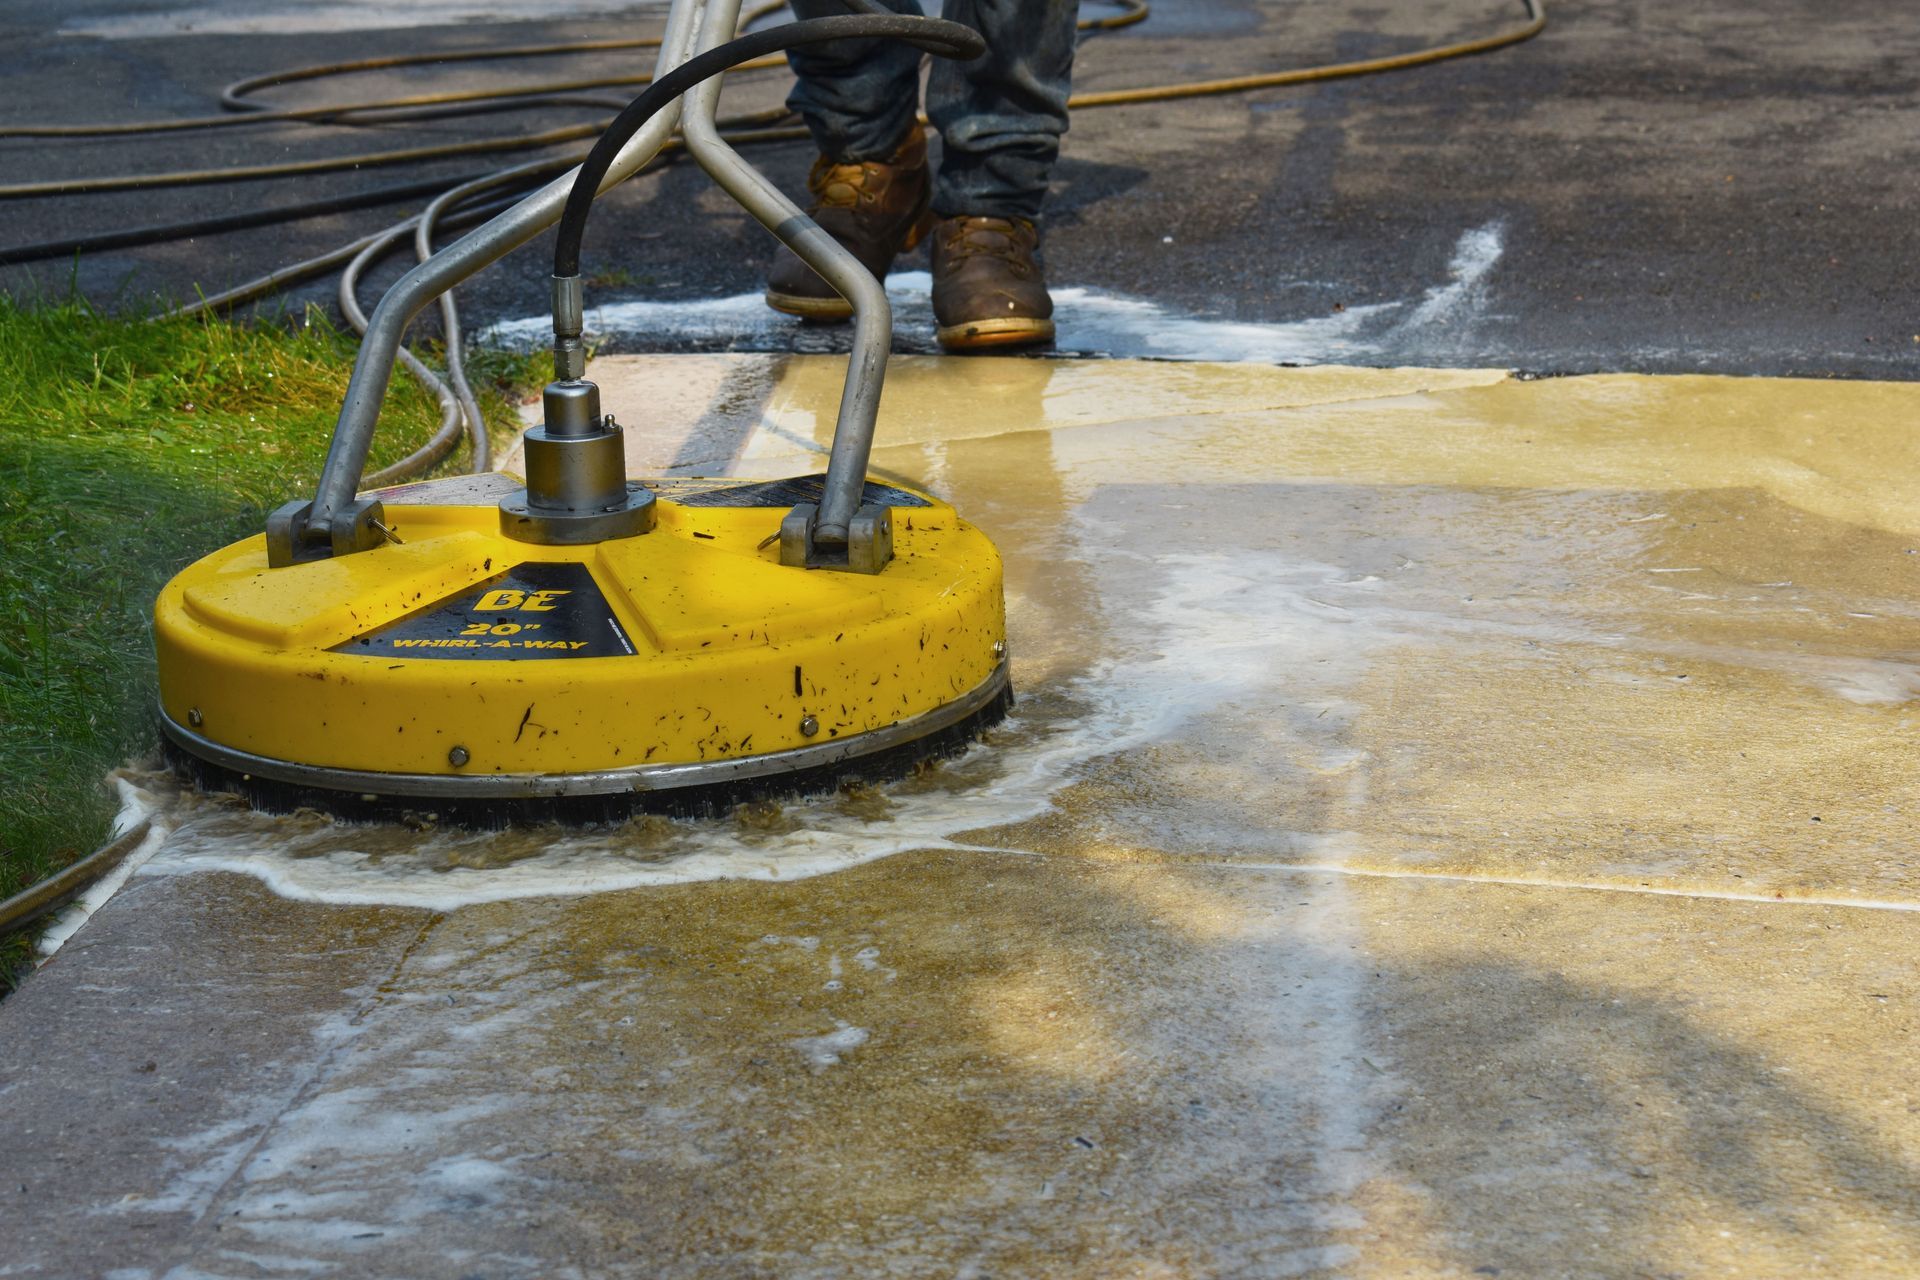 An image showing a concrete pathway being cleaned using the soft washing pressure washing method.